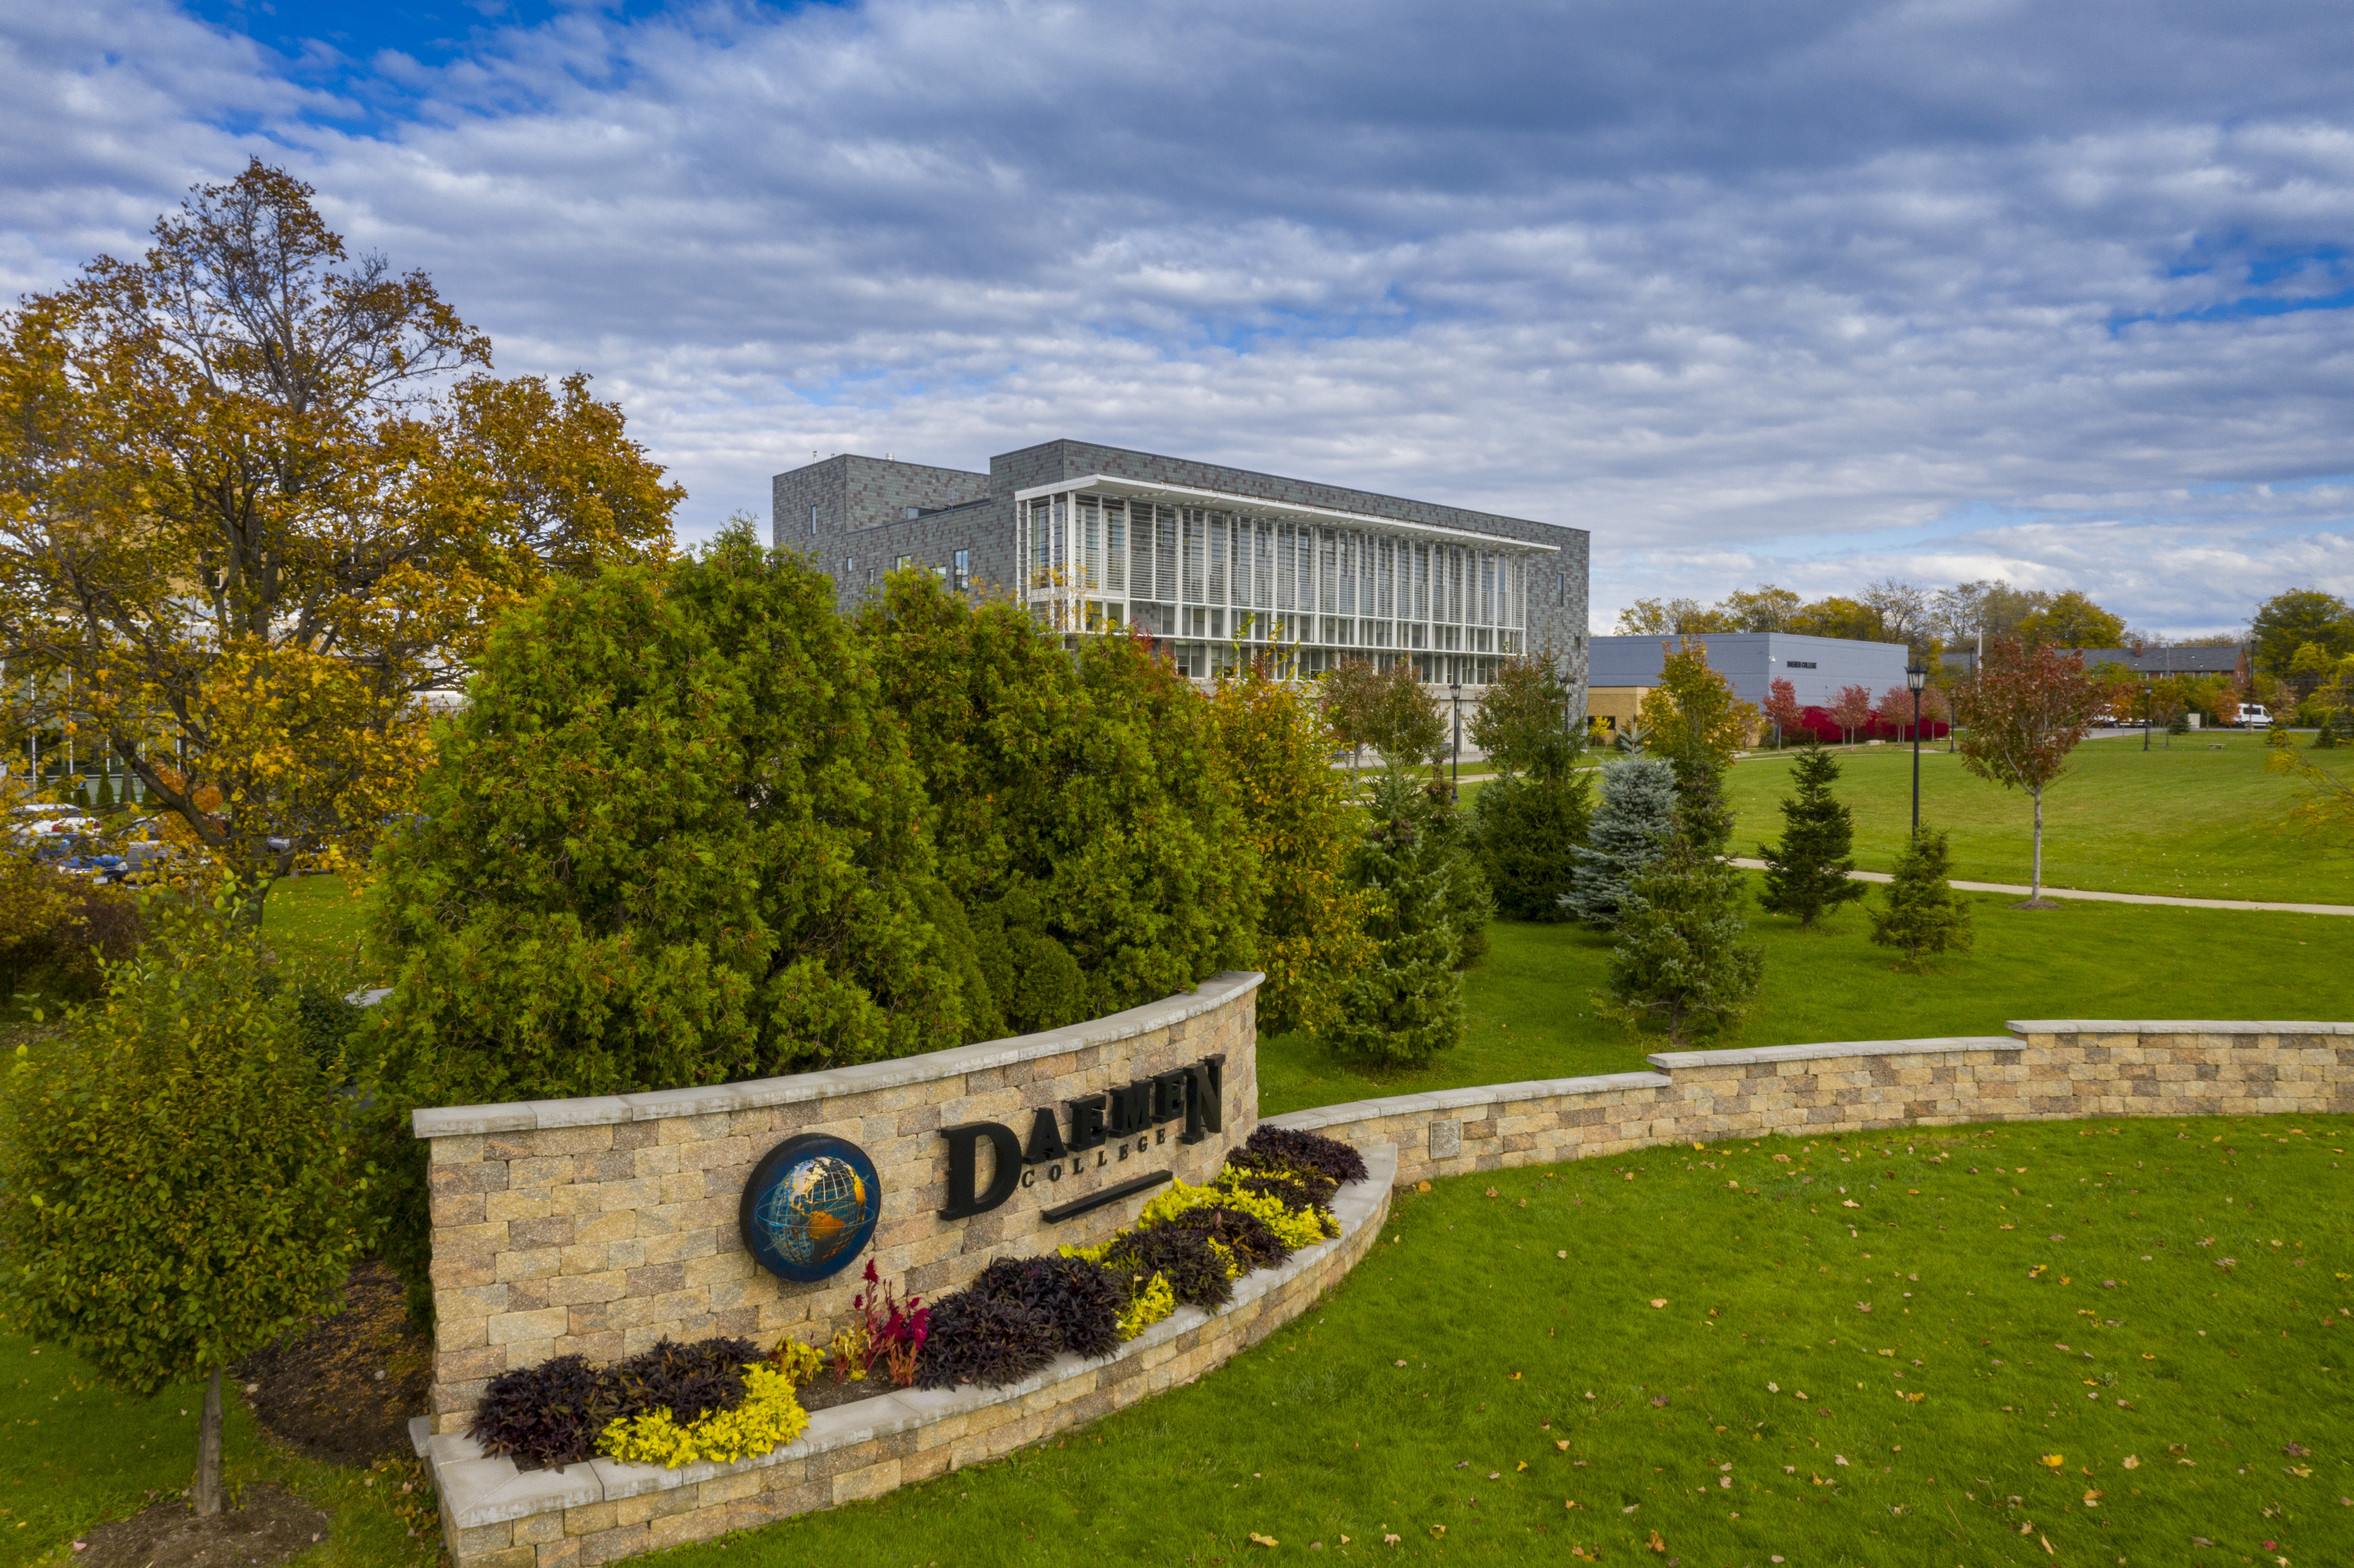 Daemen Front Sign in Fall